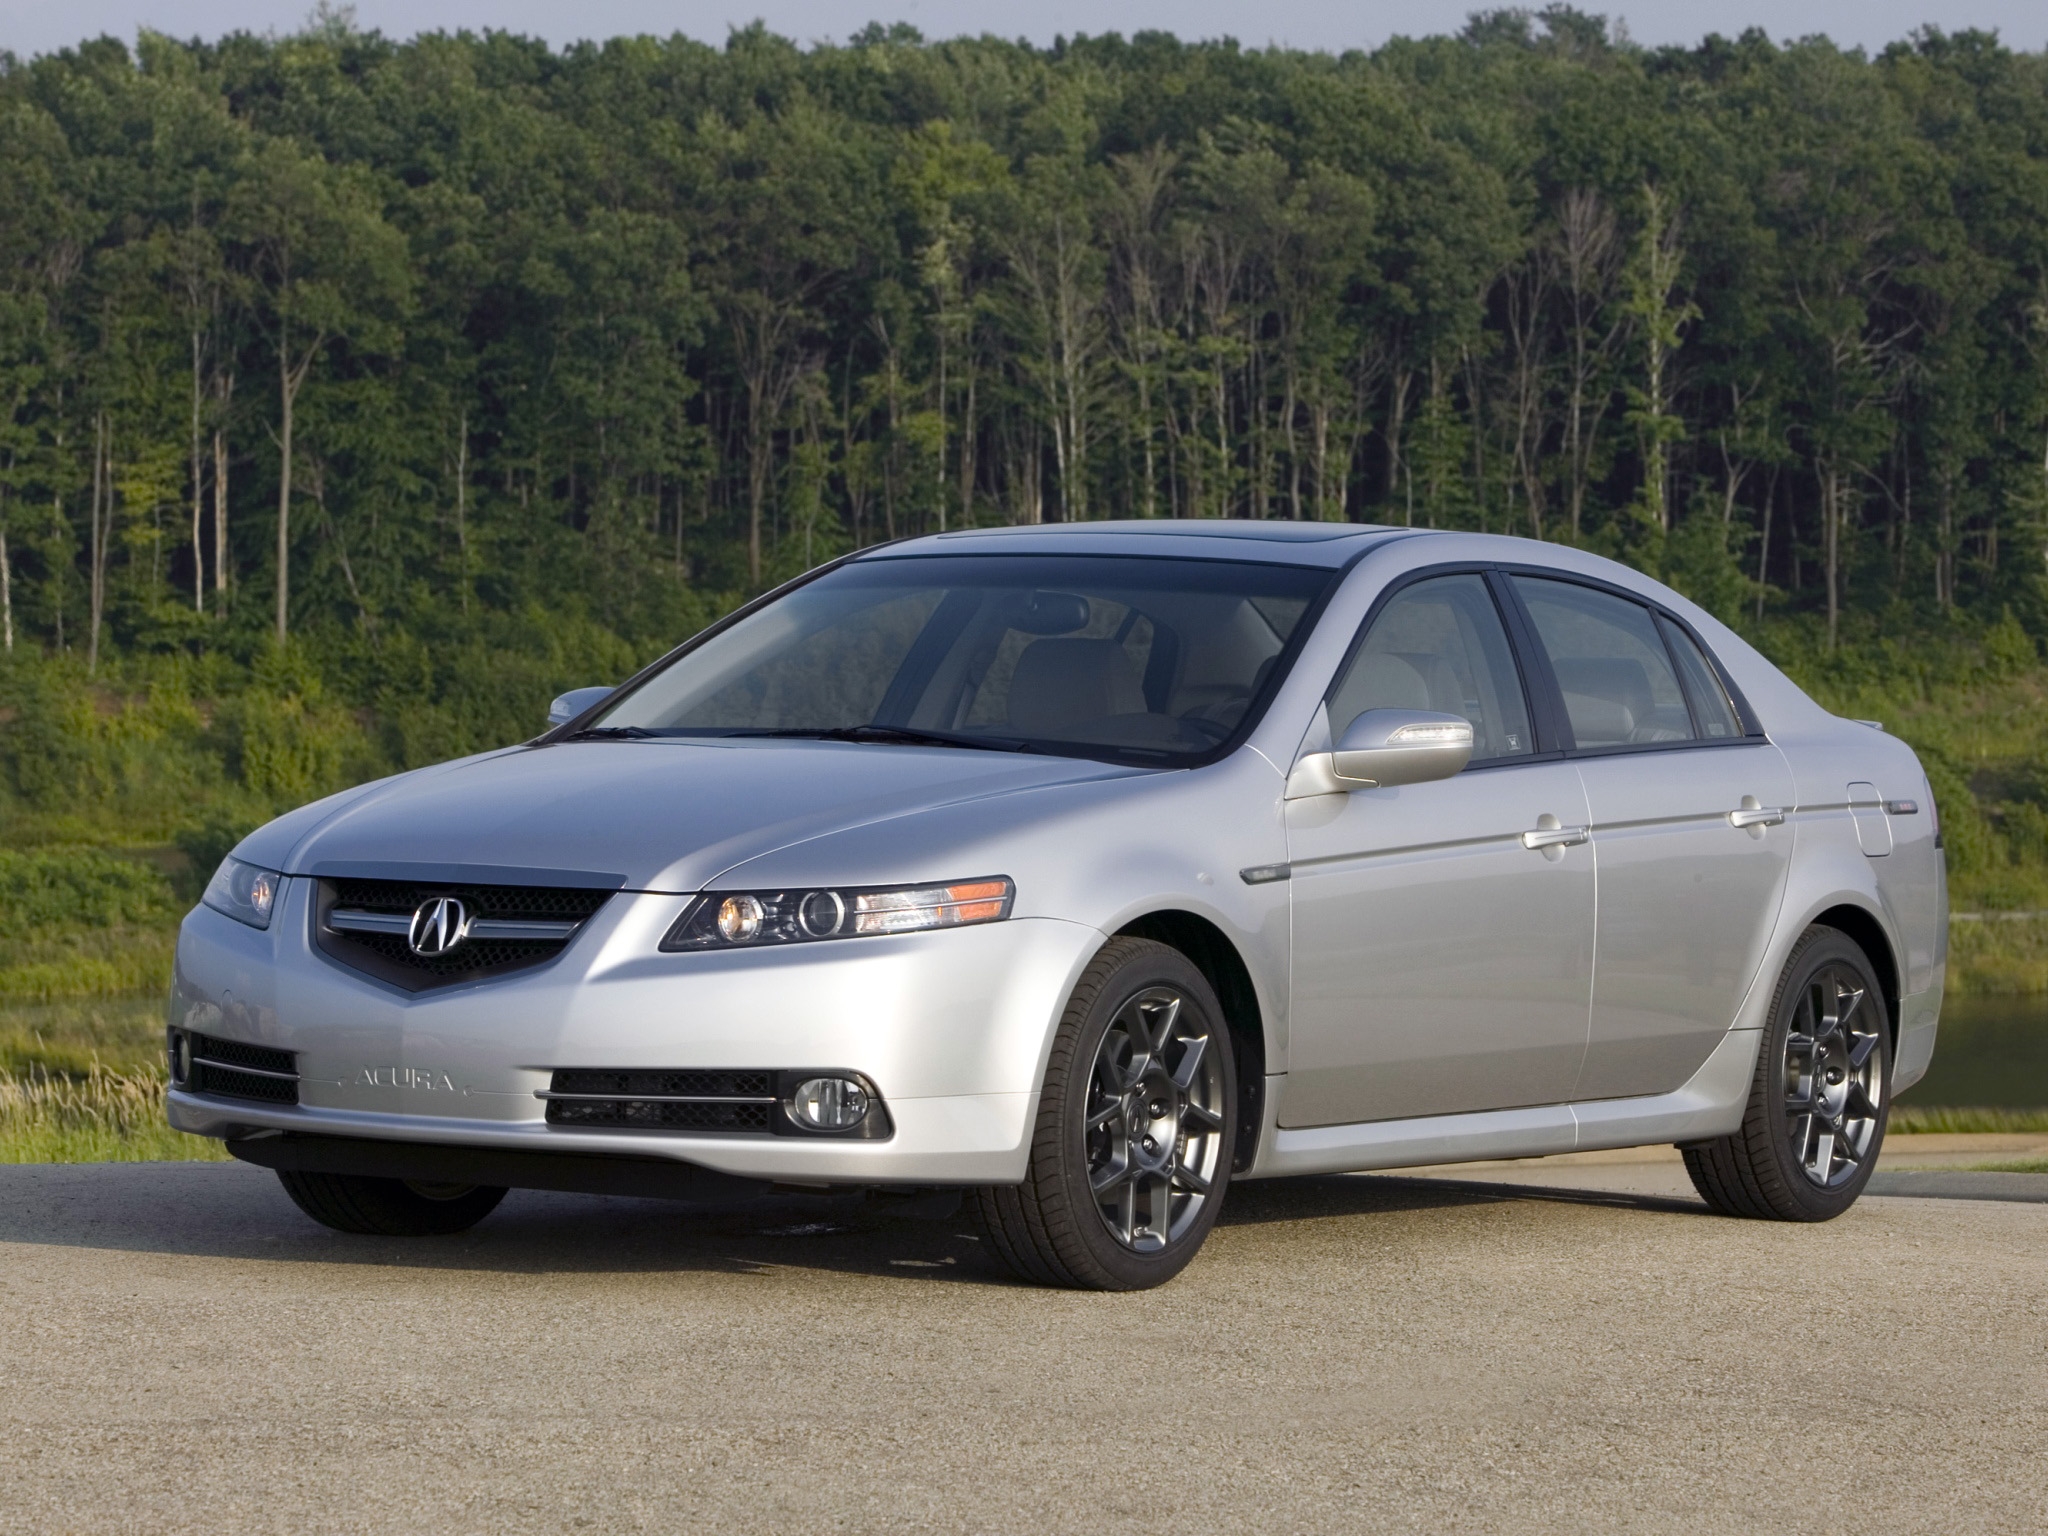 Free HD cars, auto, grass, acura, forest, front view, style, akura, shrubs, tl, 2007, silver metallic